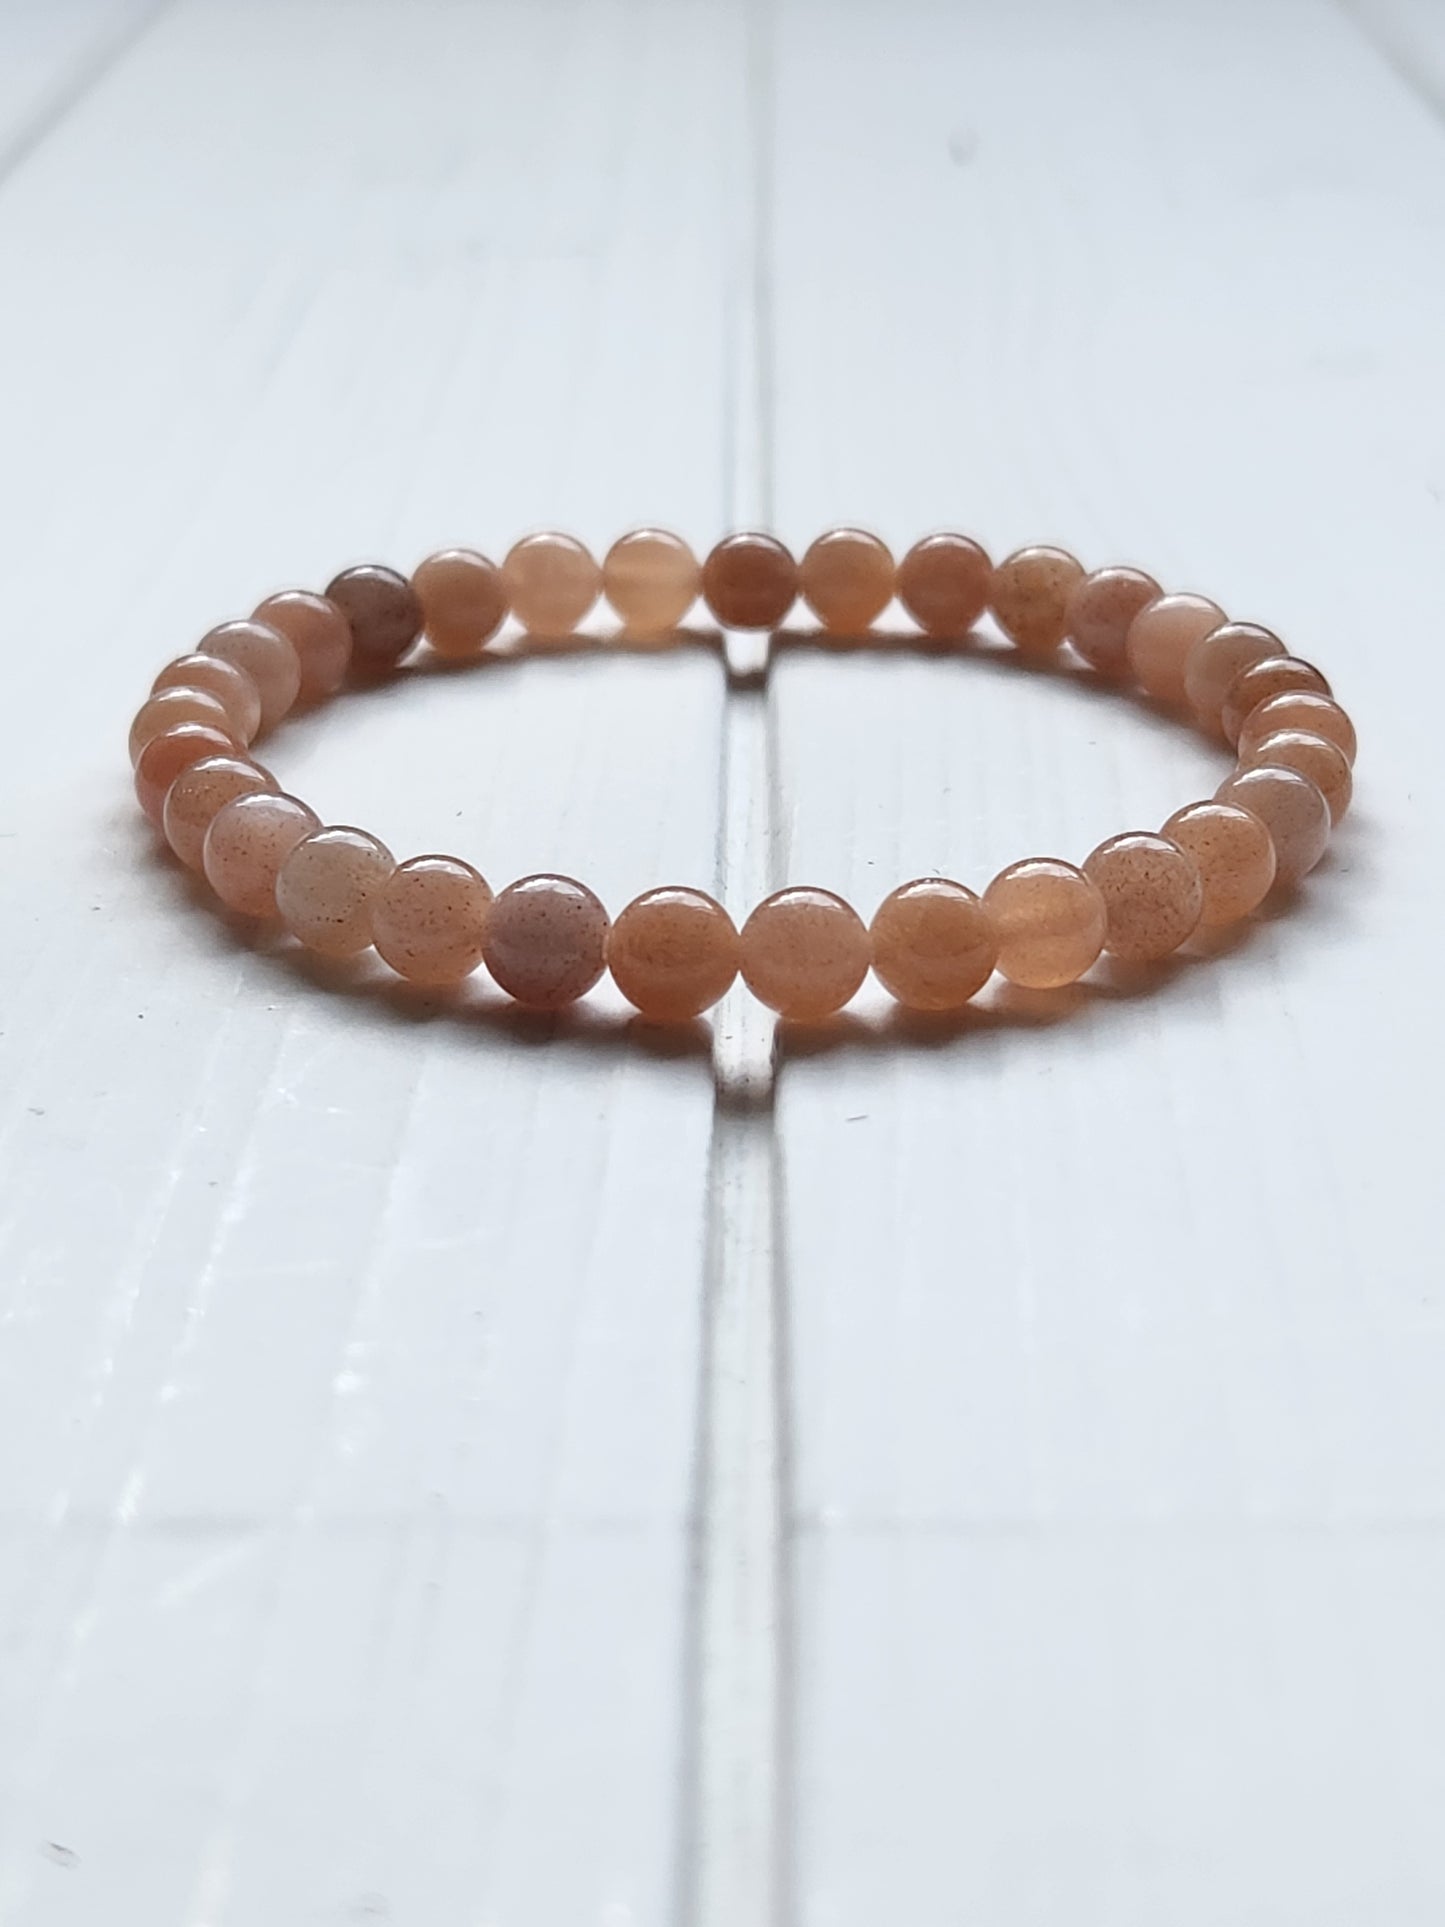 Peach Moonstone Bracelet - 6mm stones - acceptance - dreaming - soothing - goodness